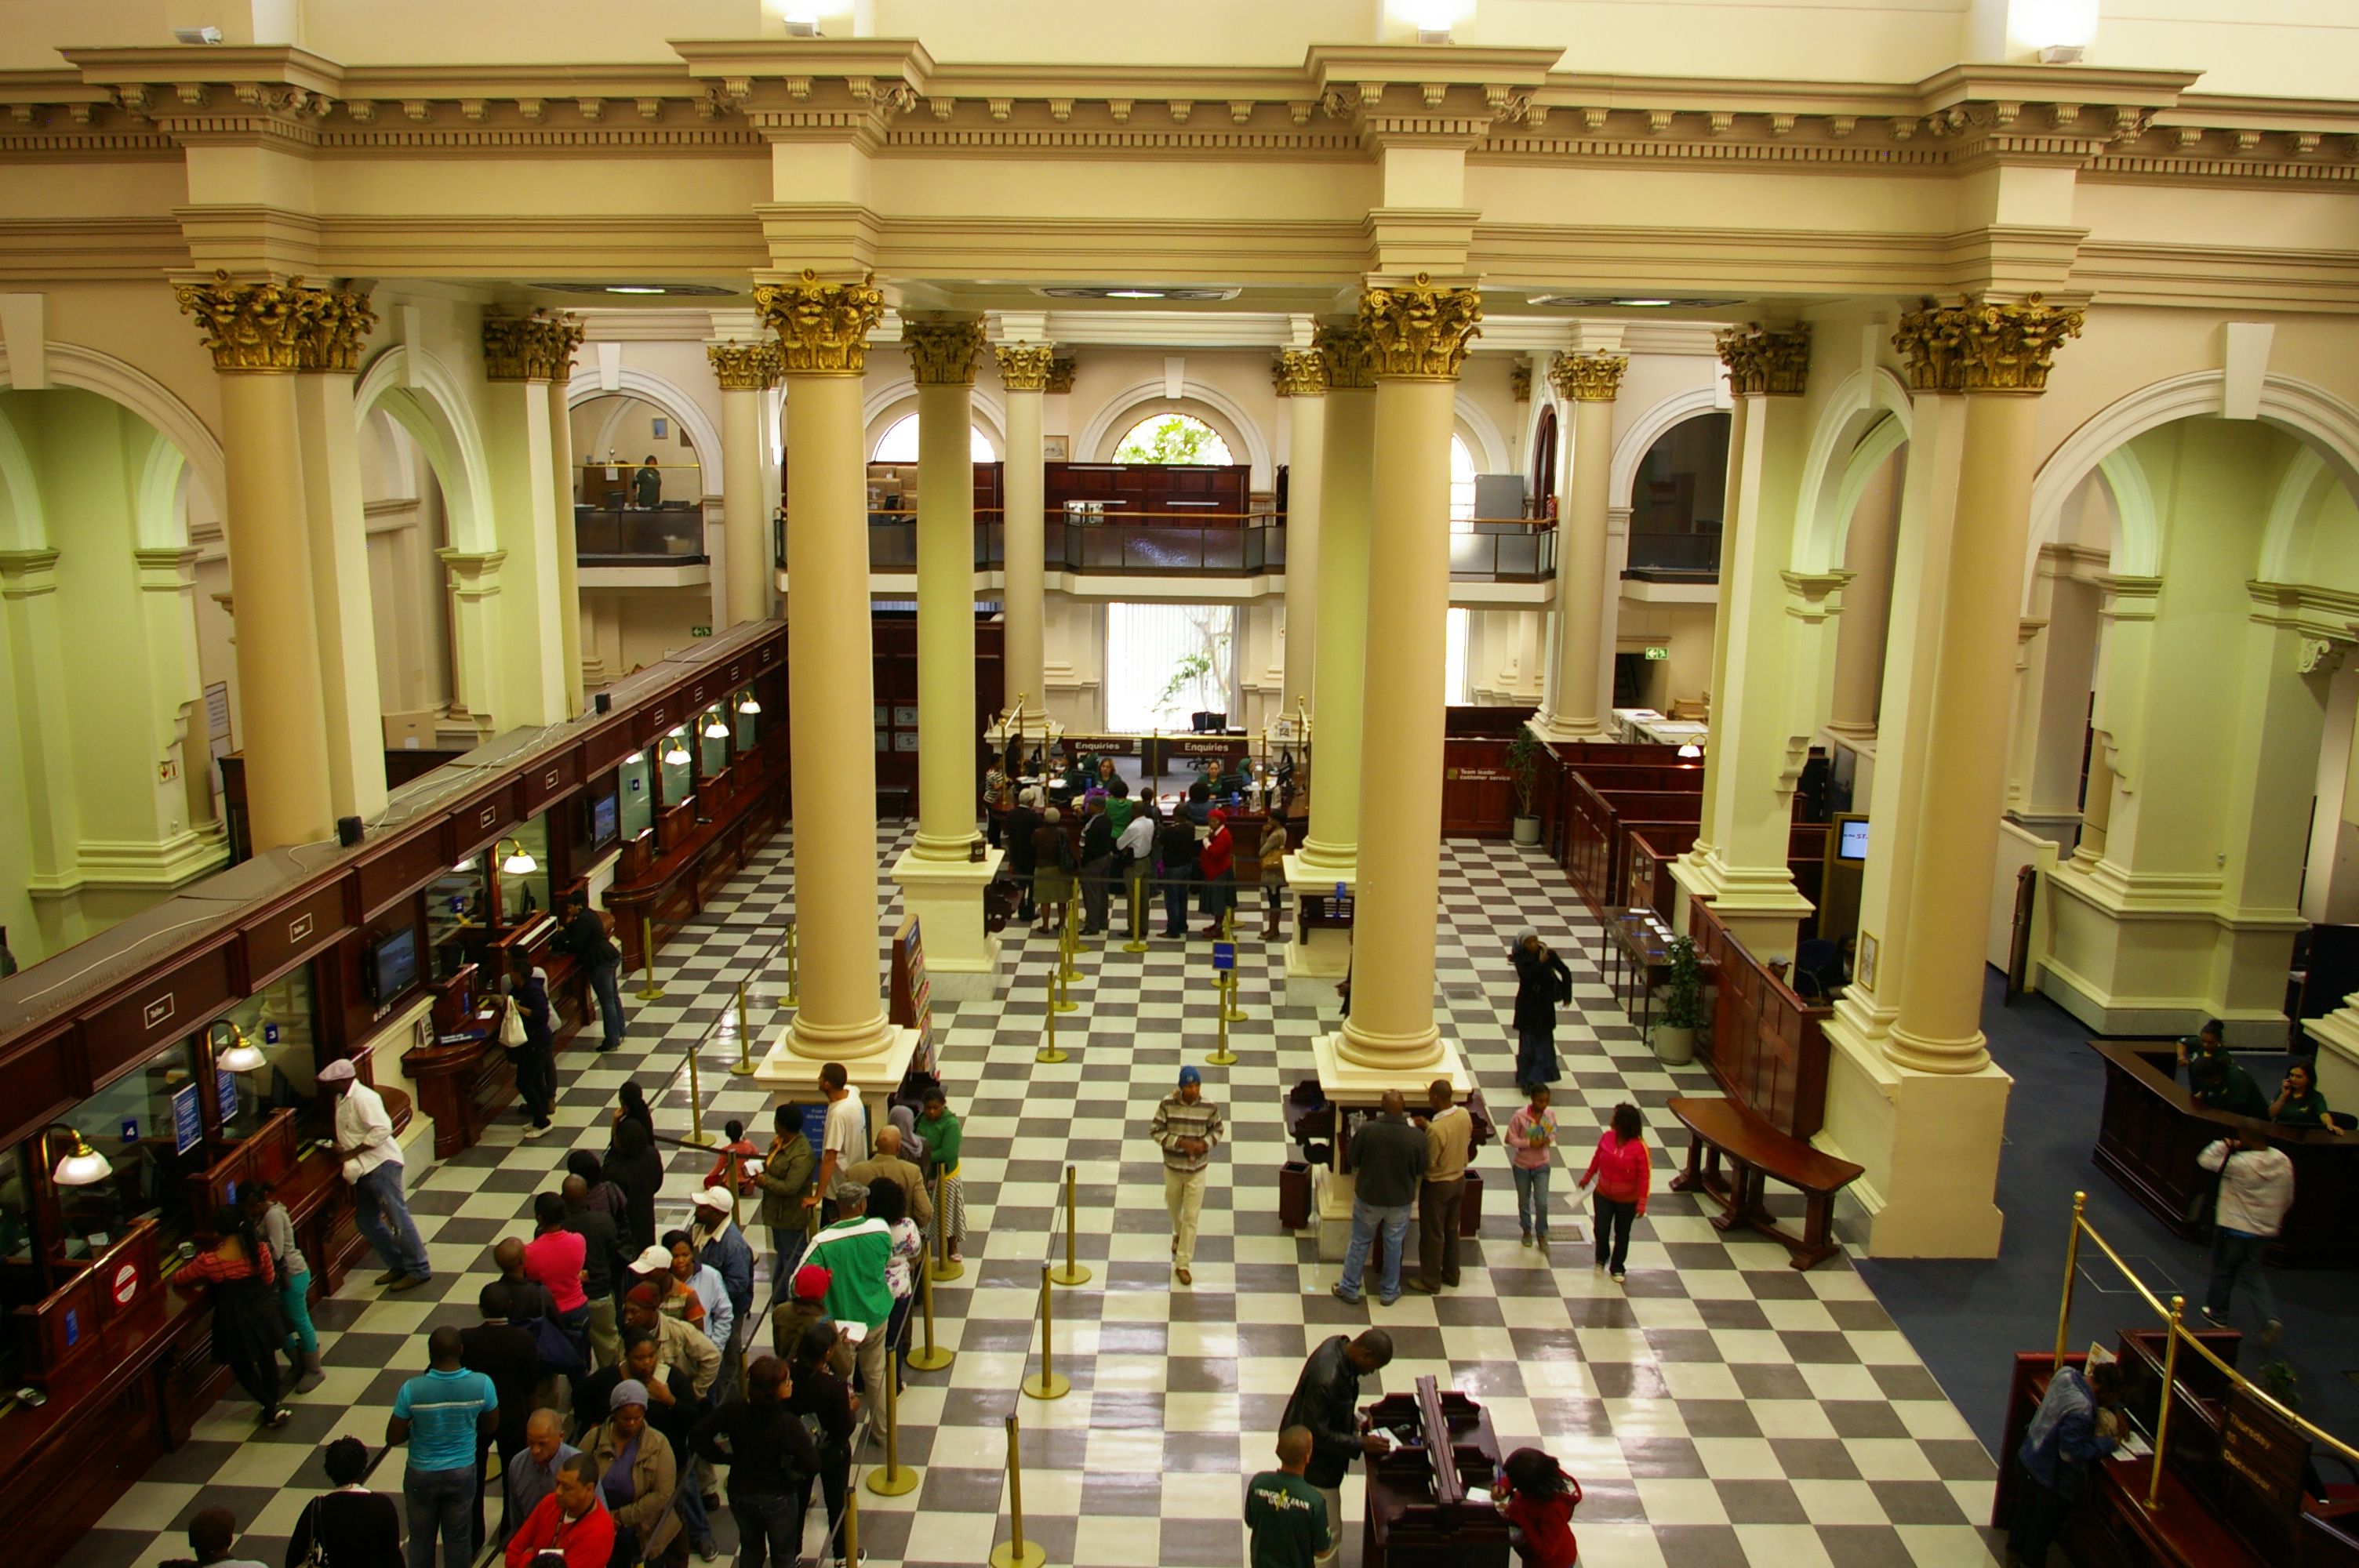 Cape Town museum at Standard Bank building